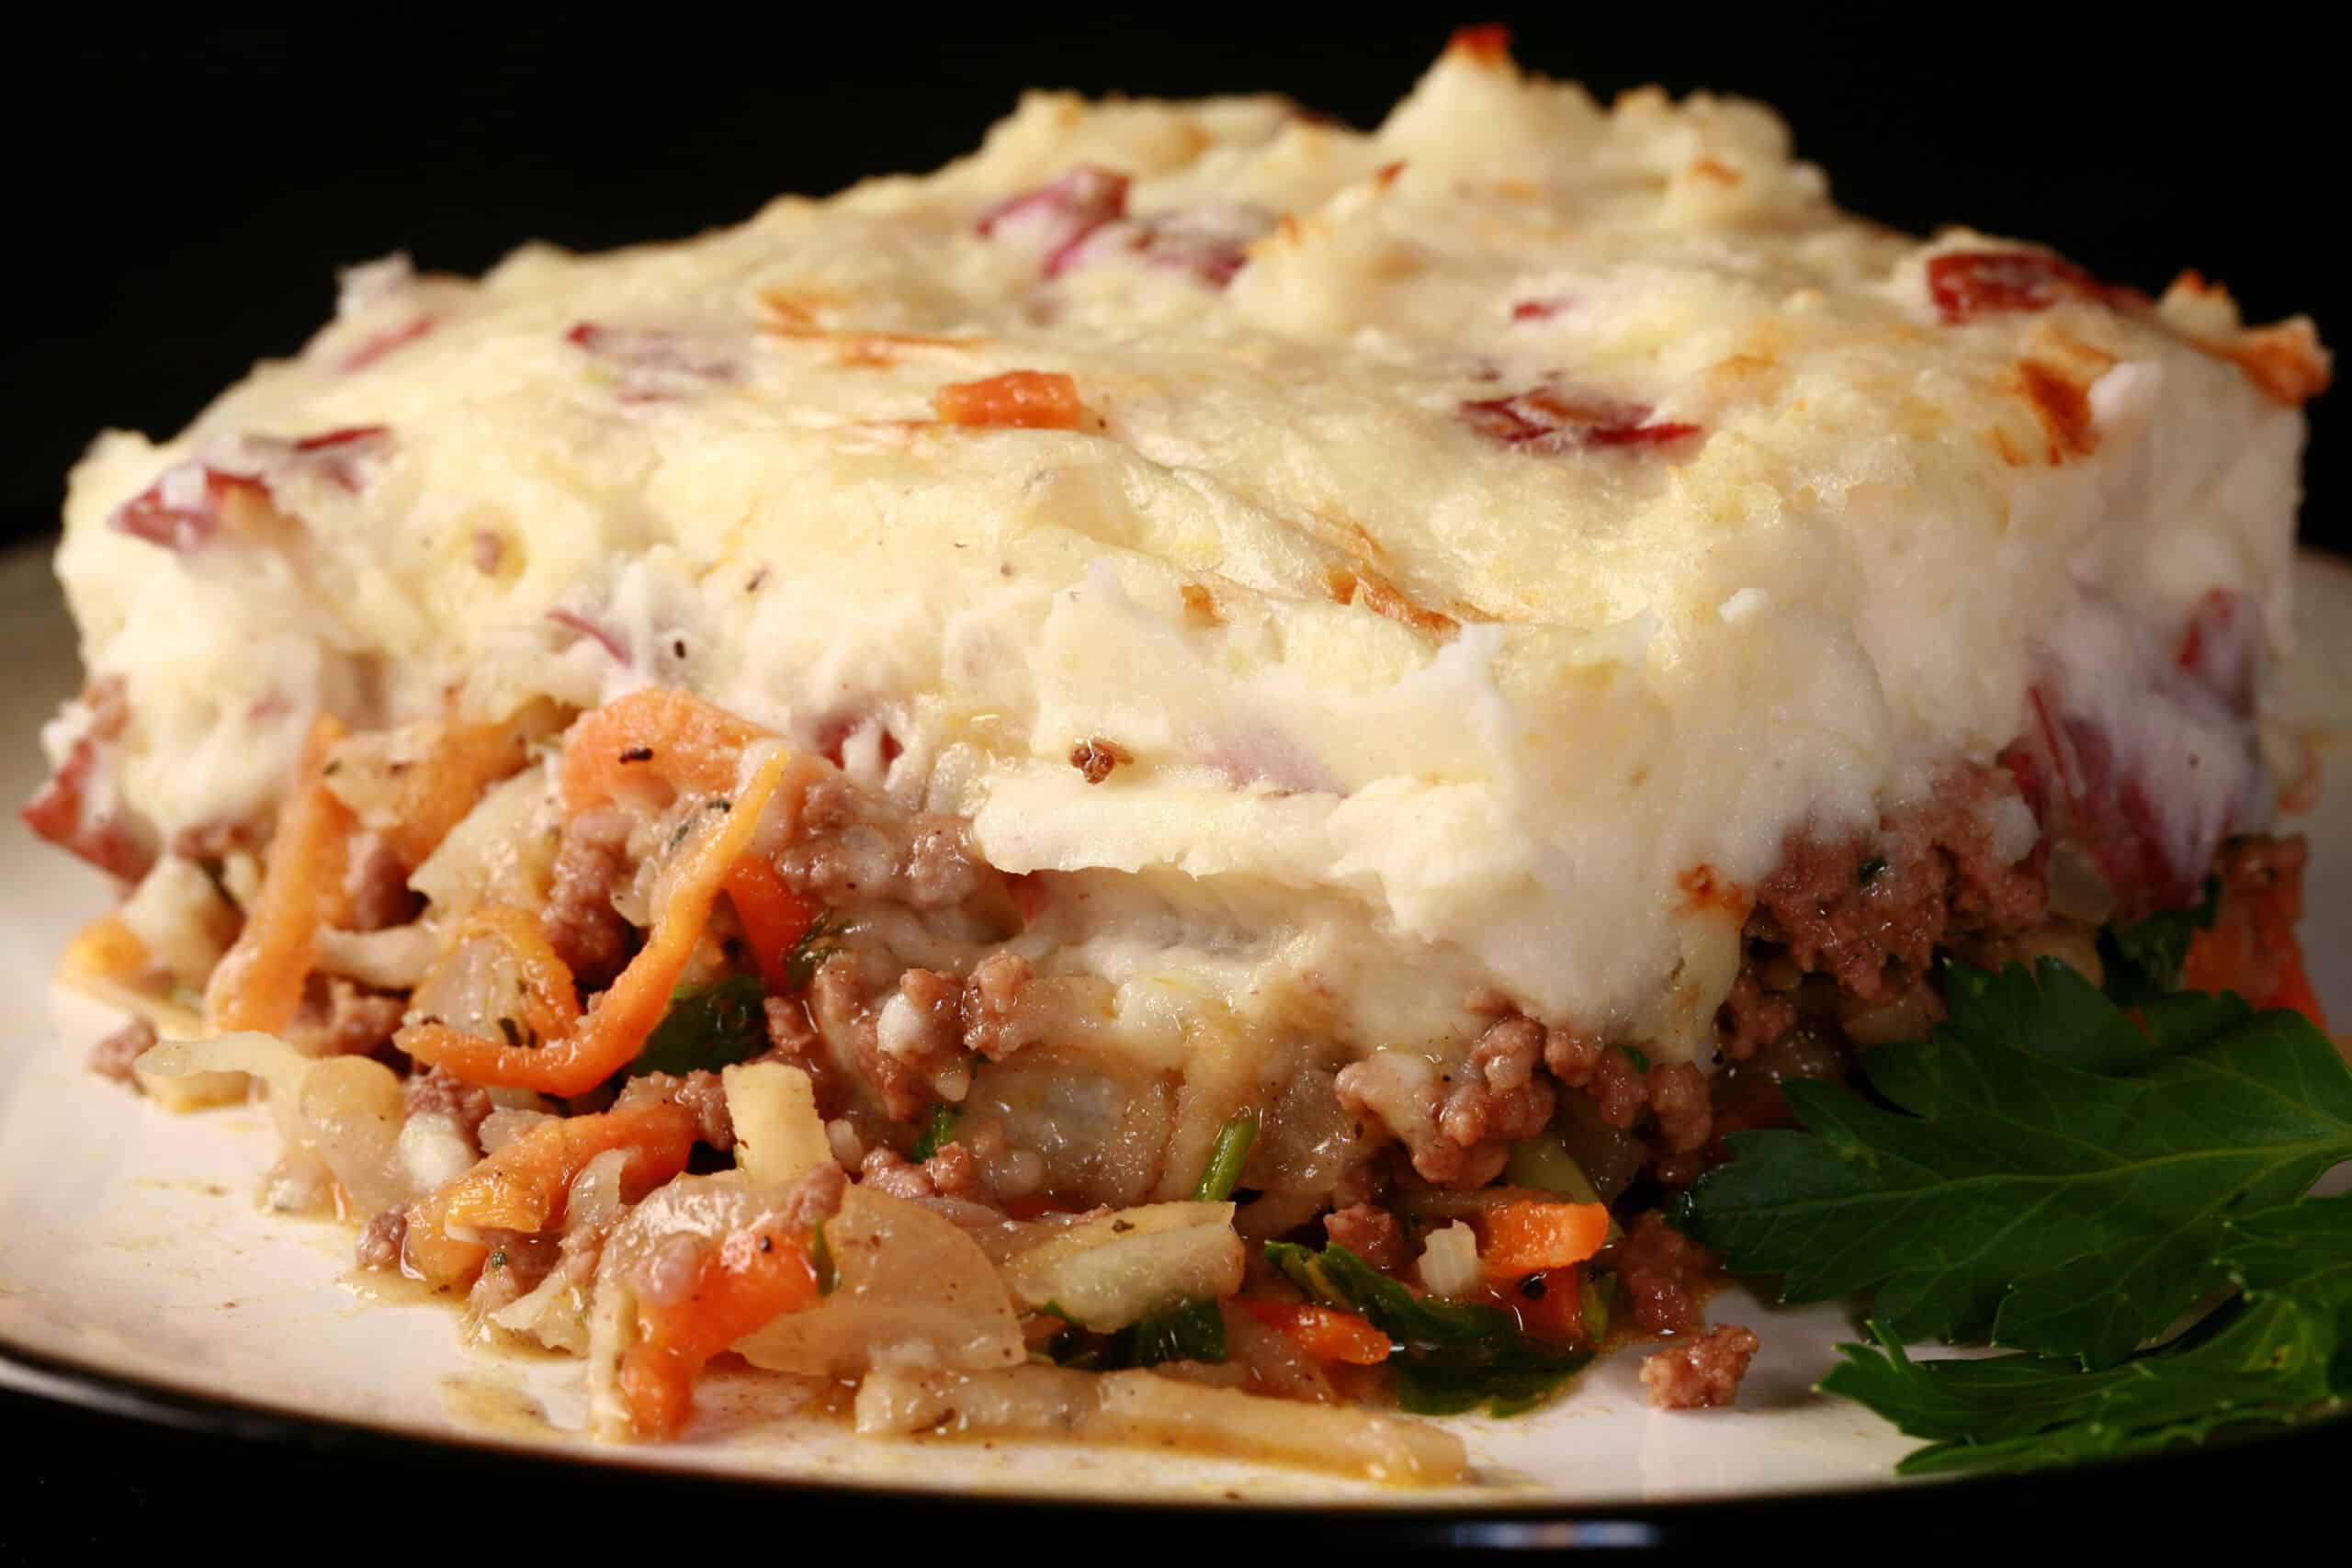 A close up photo of a serving of shepherd’s pie.